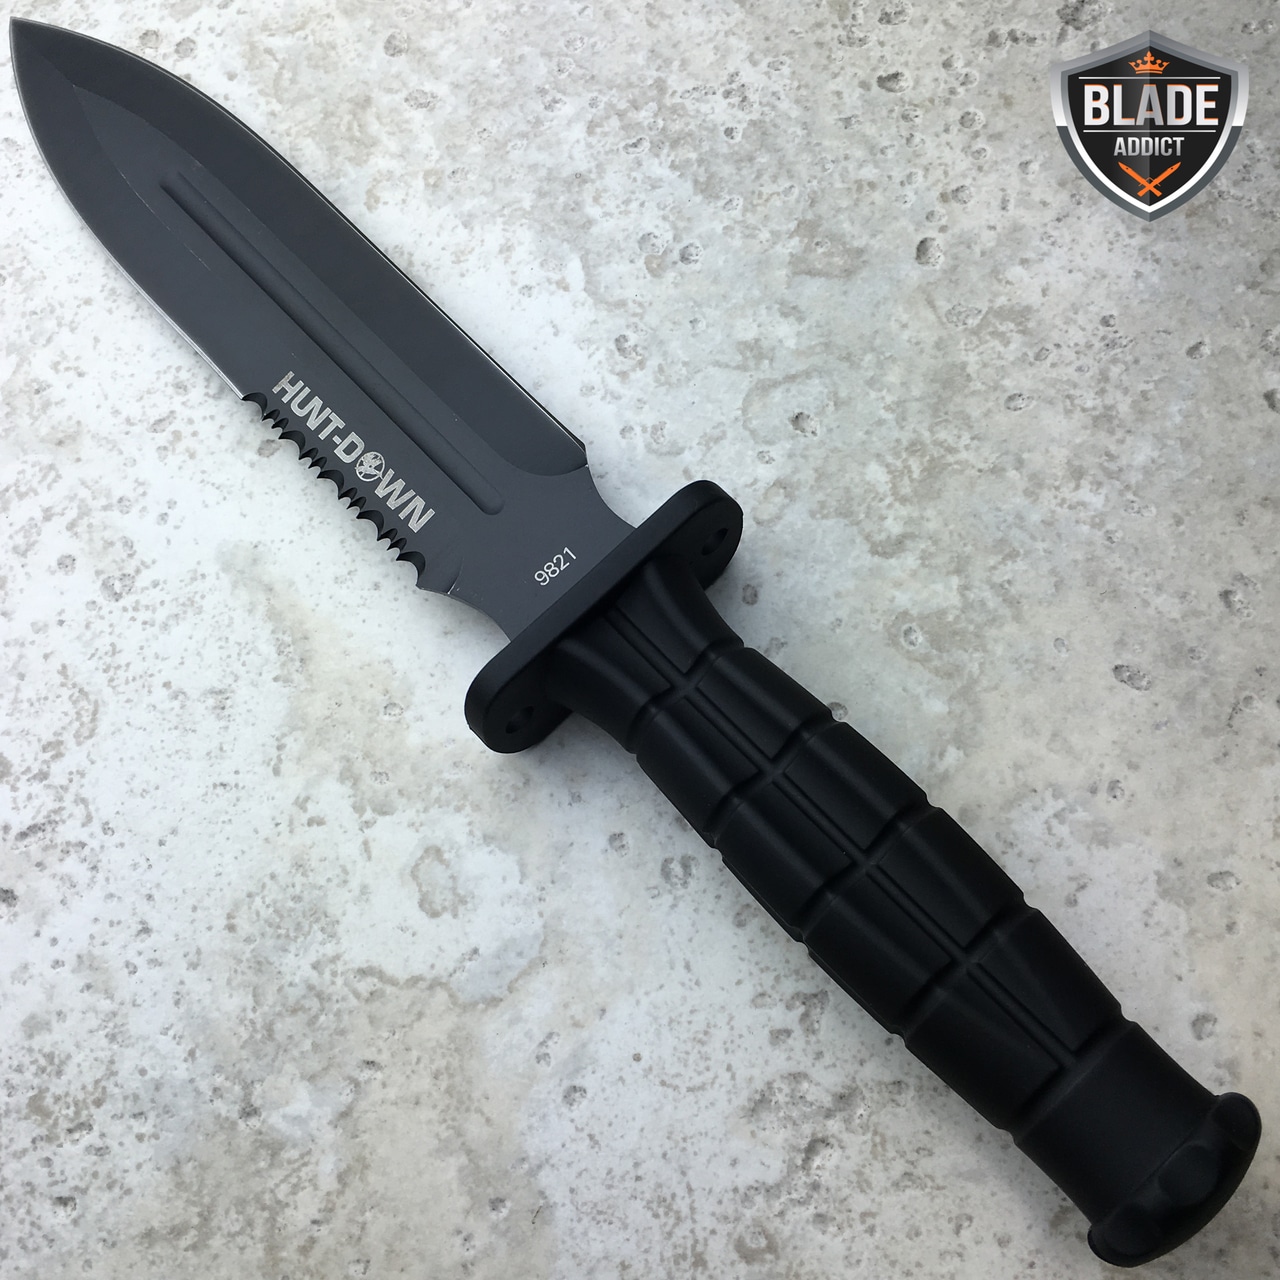 12" TACTICAL BOWIE SURVIVAL HUNTING KNIFE MILITARY DAGGER Fixed Blade